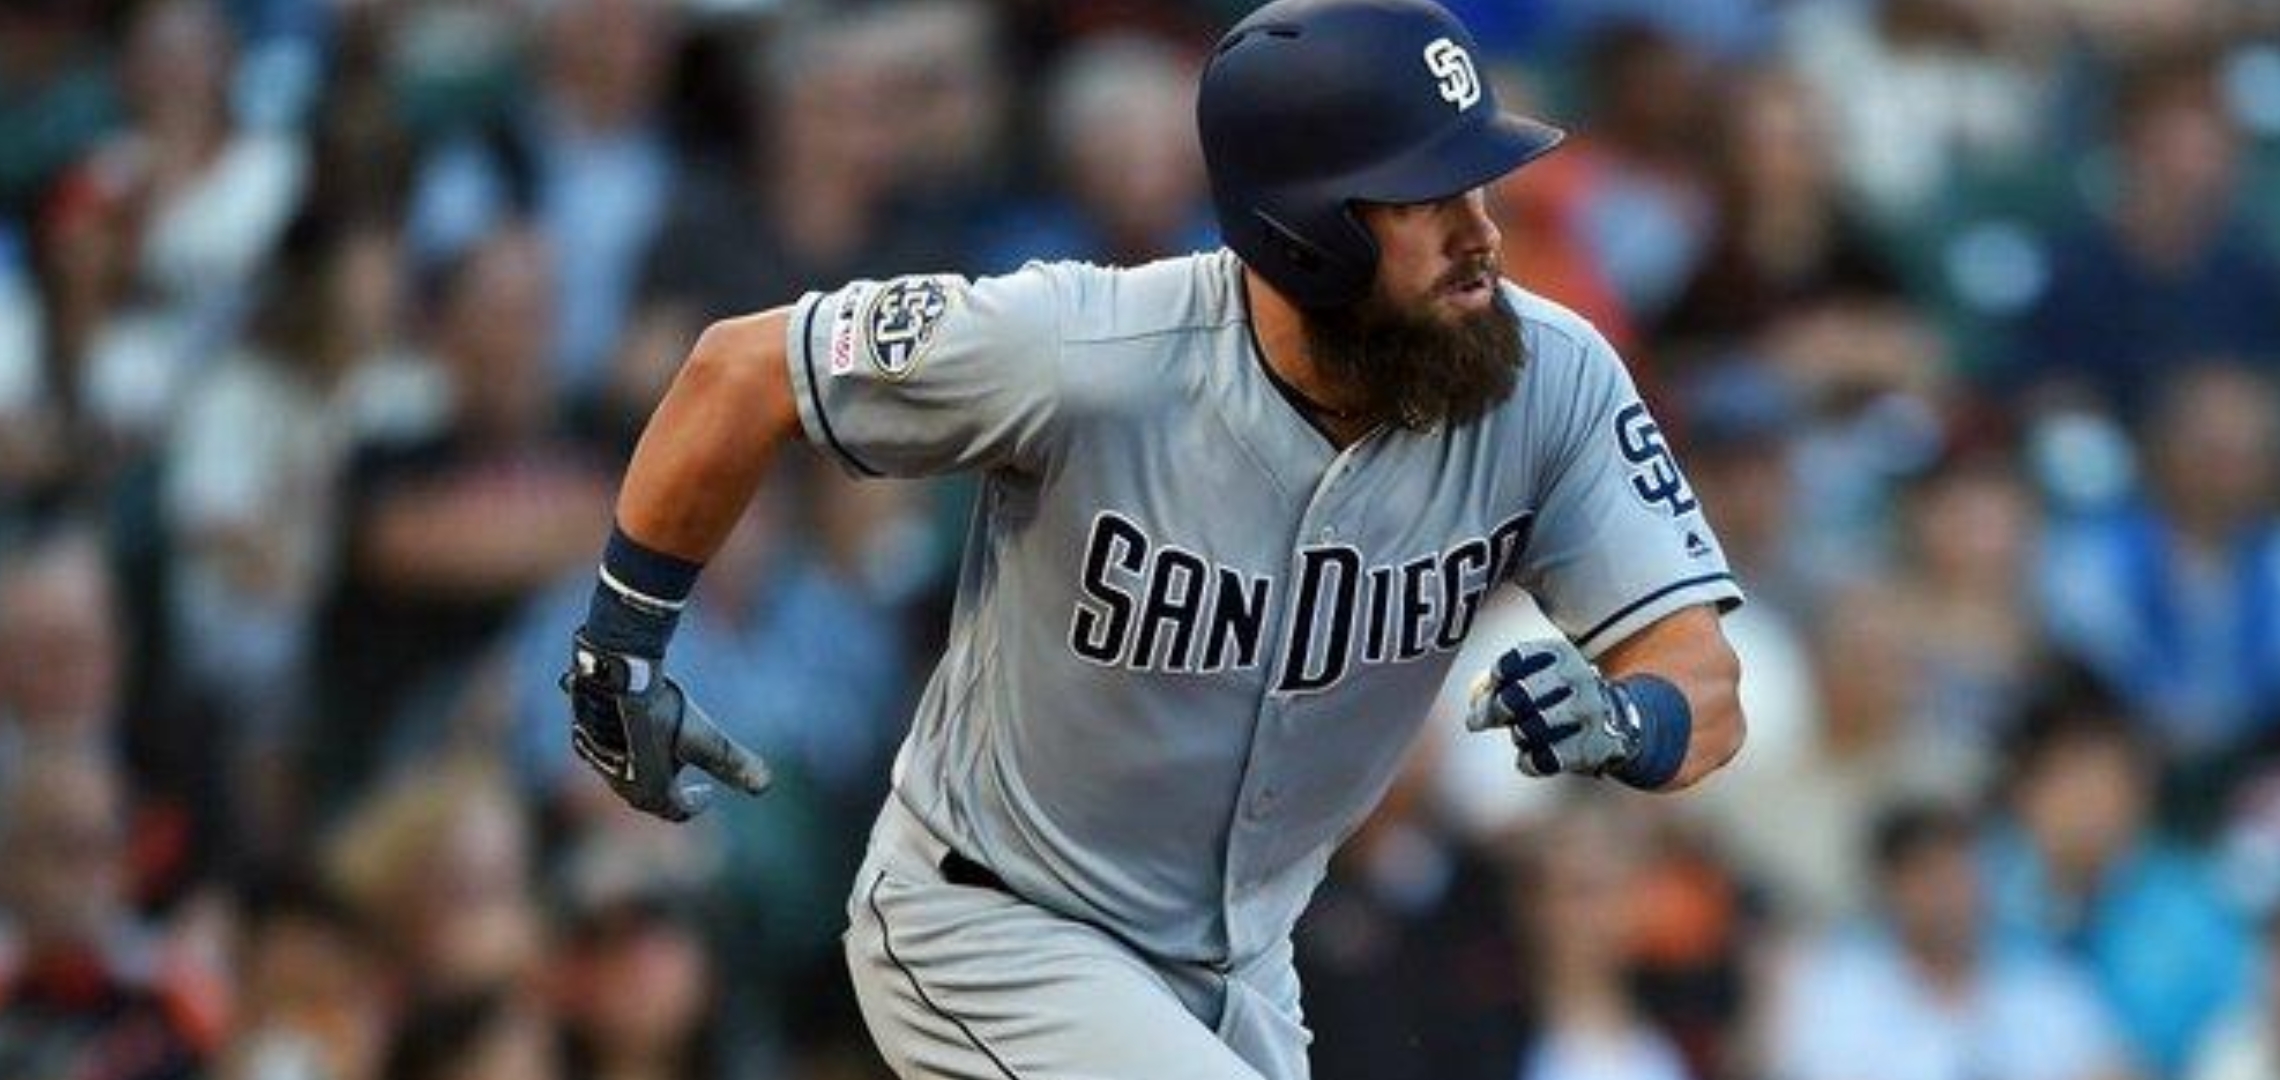 In Joey Lucchesi's debut, Padres lose on Brewers' big ninth - The